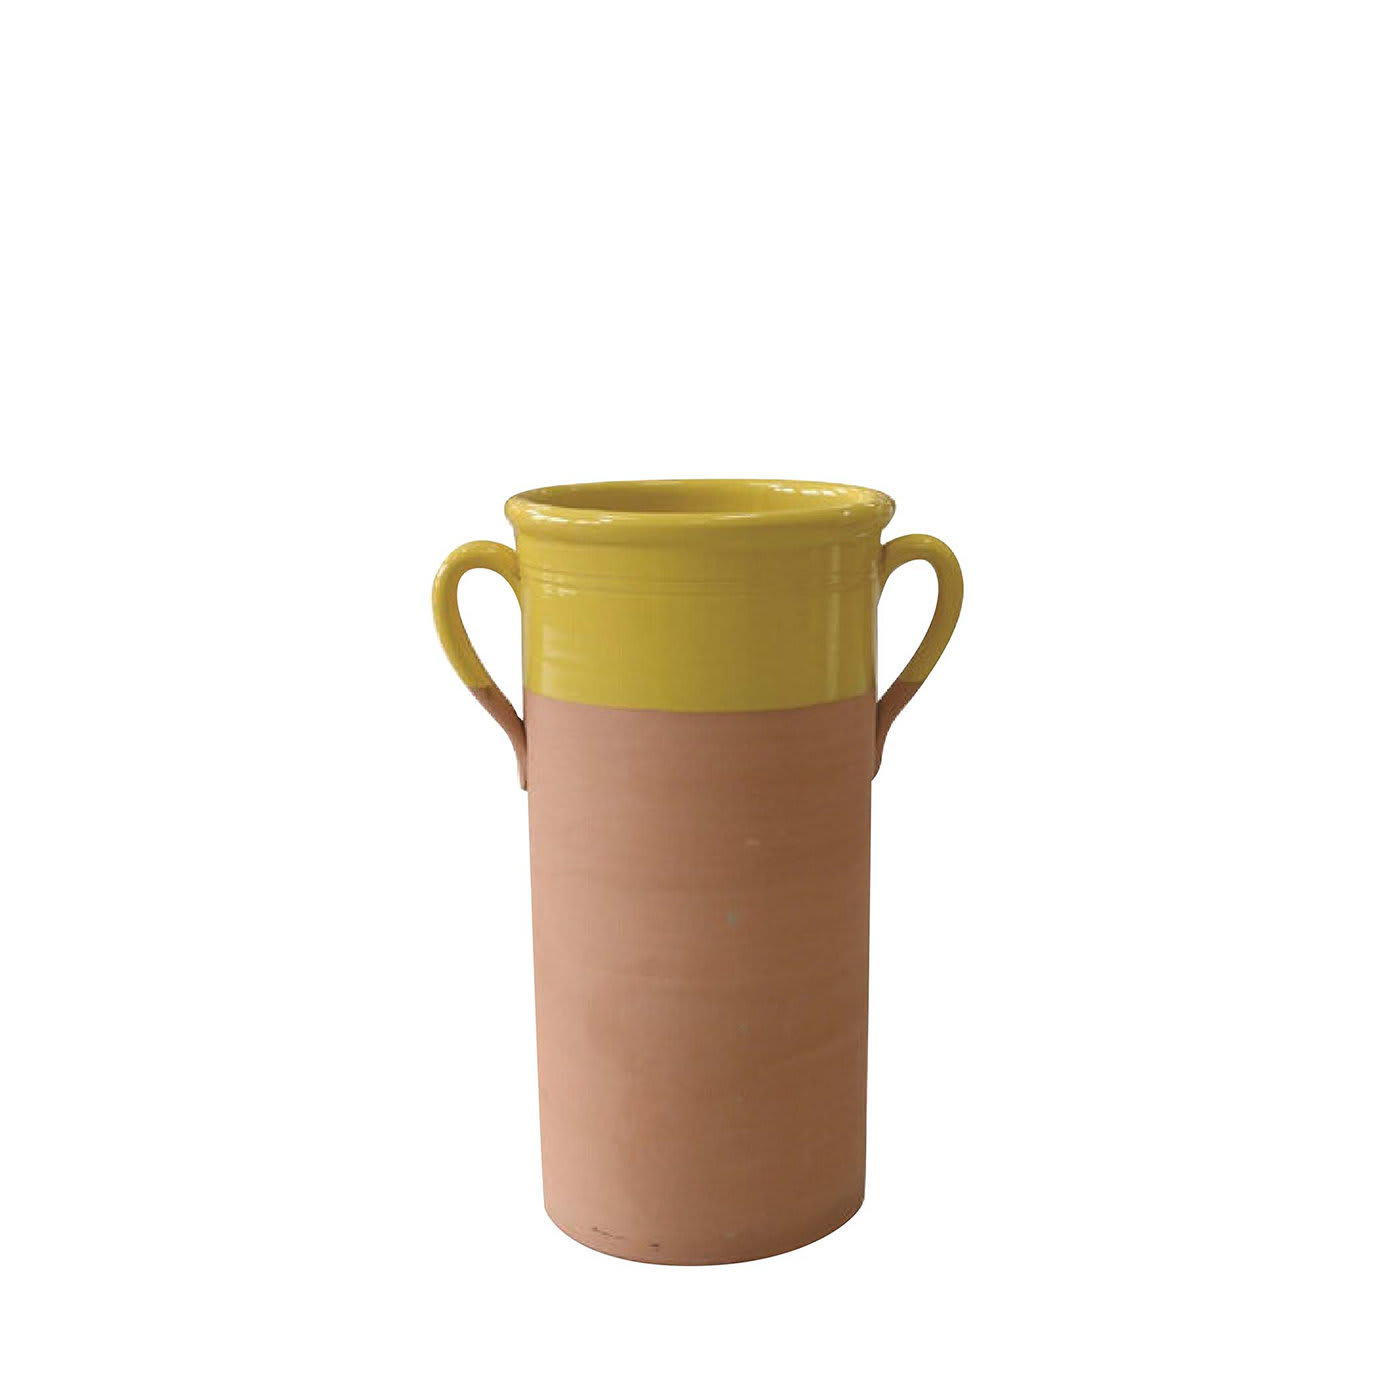 Yellow Small Cylindrical Vase with Handles - Nuova Colì